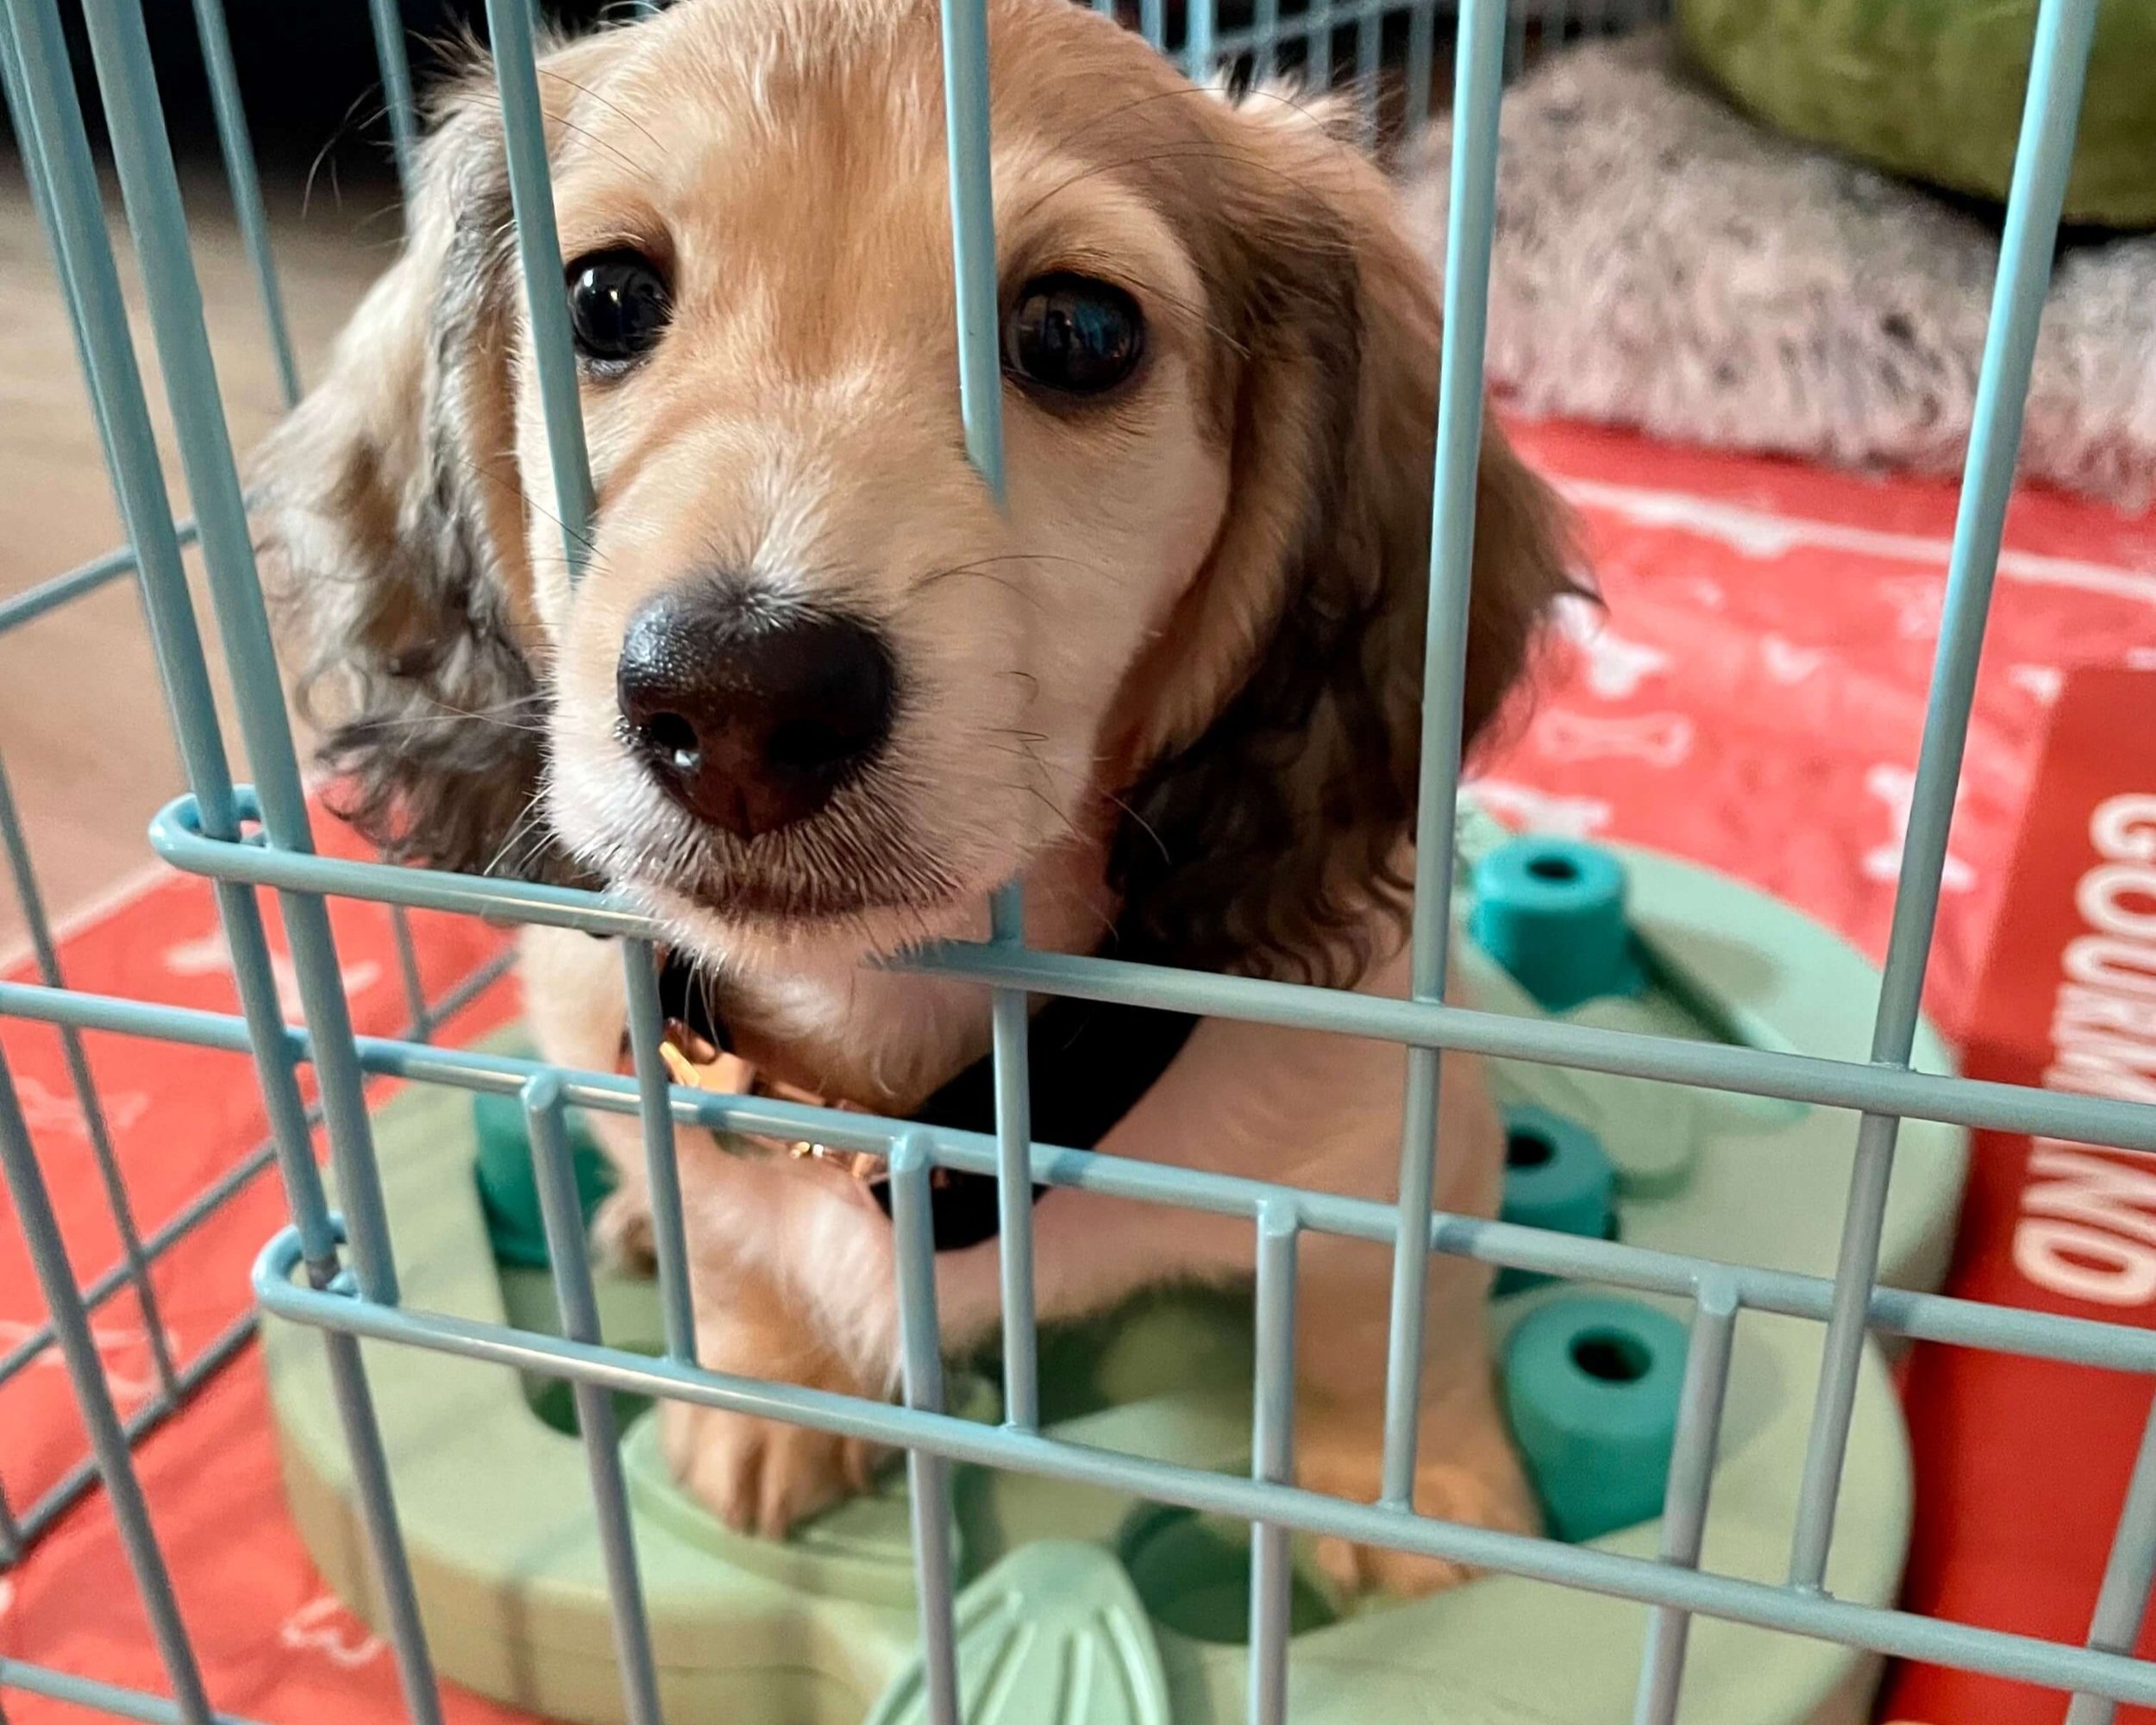 Puppy Going Potty in Crate: What to Do and How to Prevent It